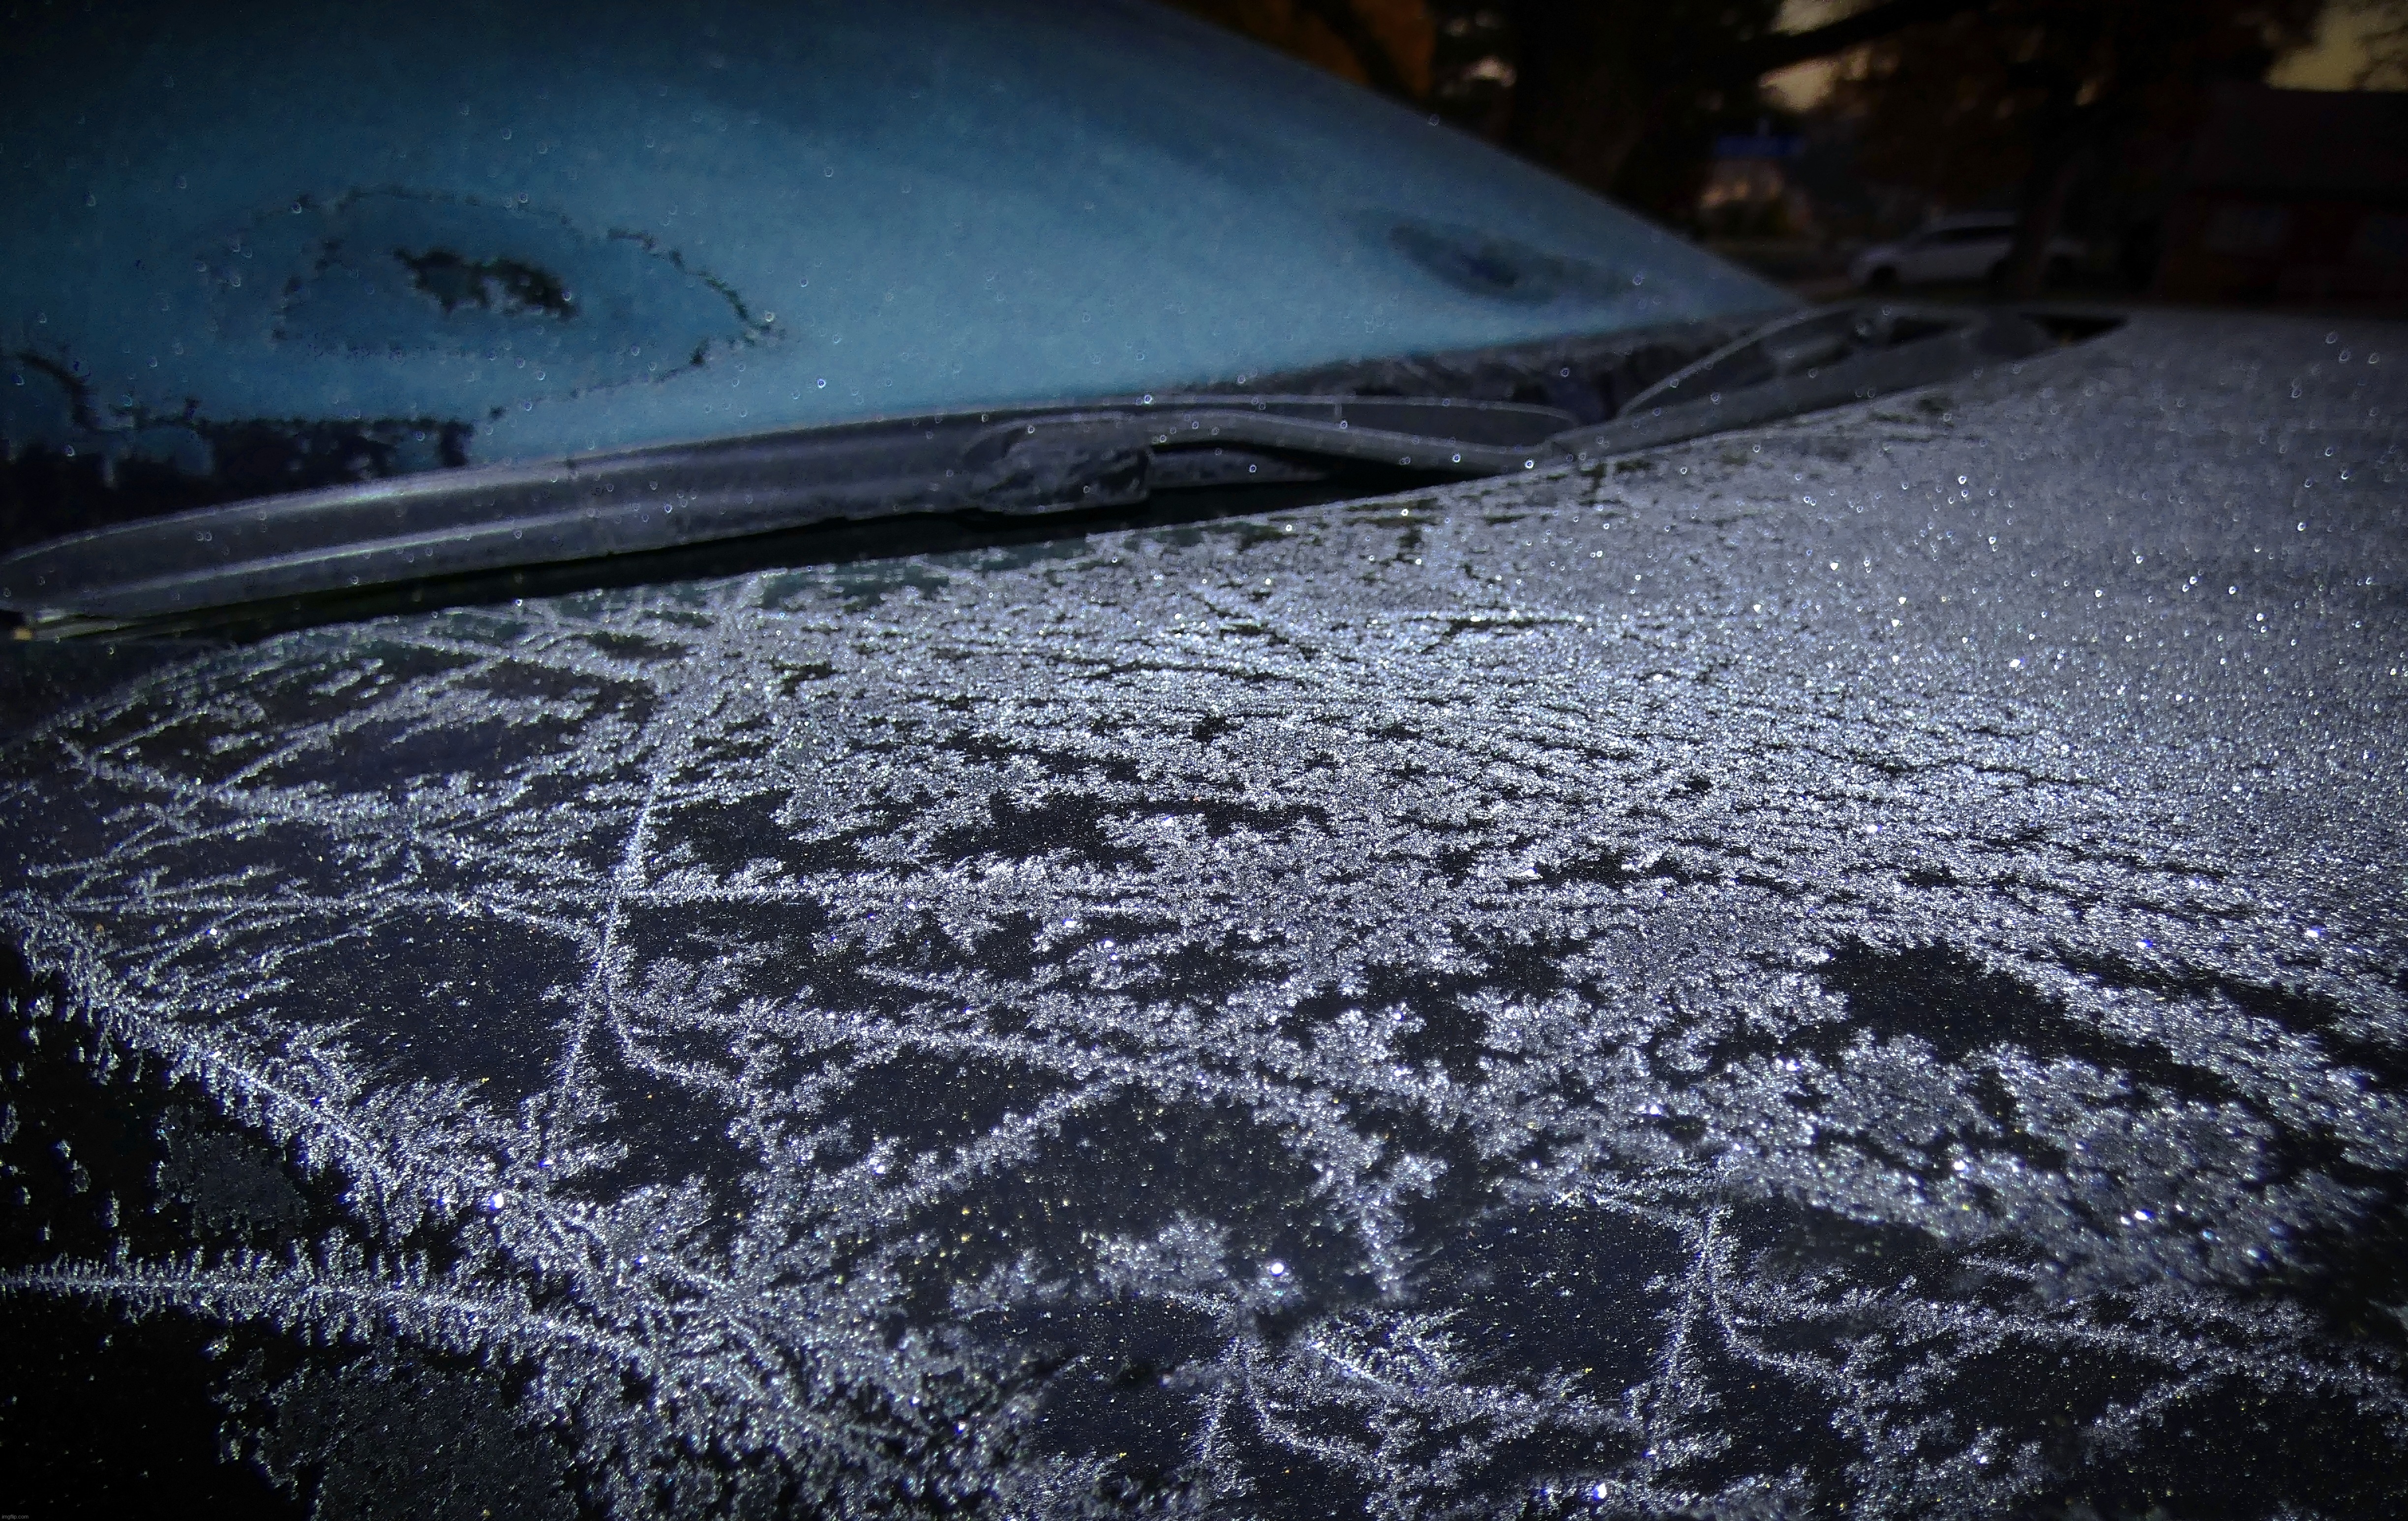 Icy Car Crystals | image tagged in share your own photos | made w/ Imgflip meme maker